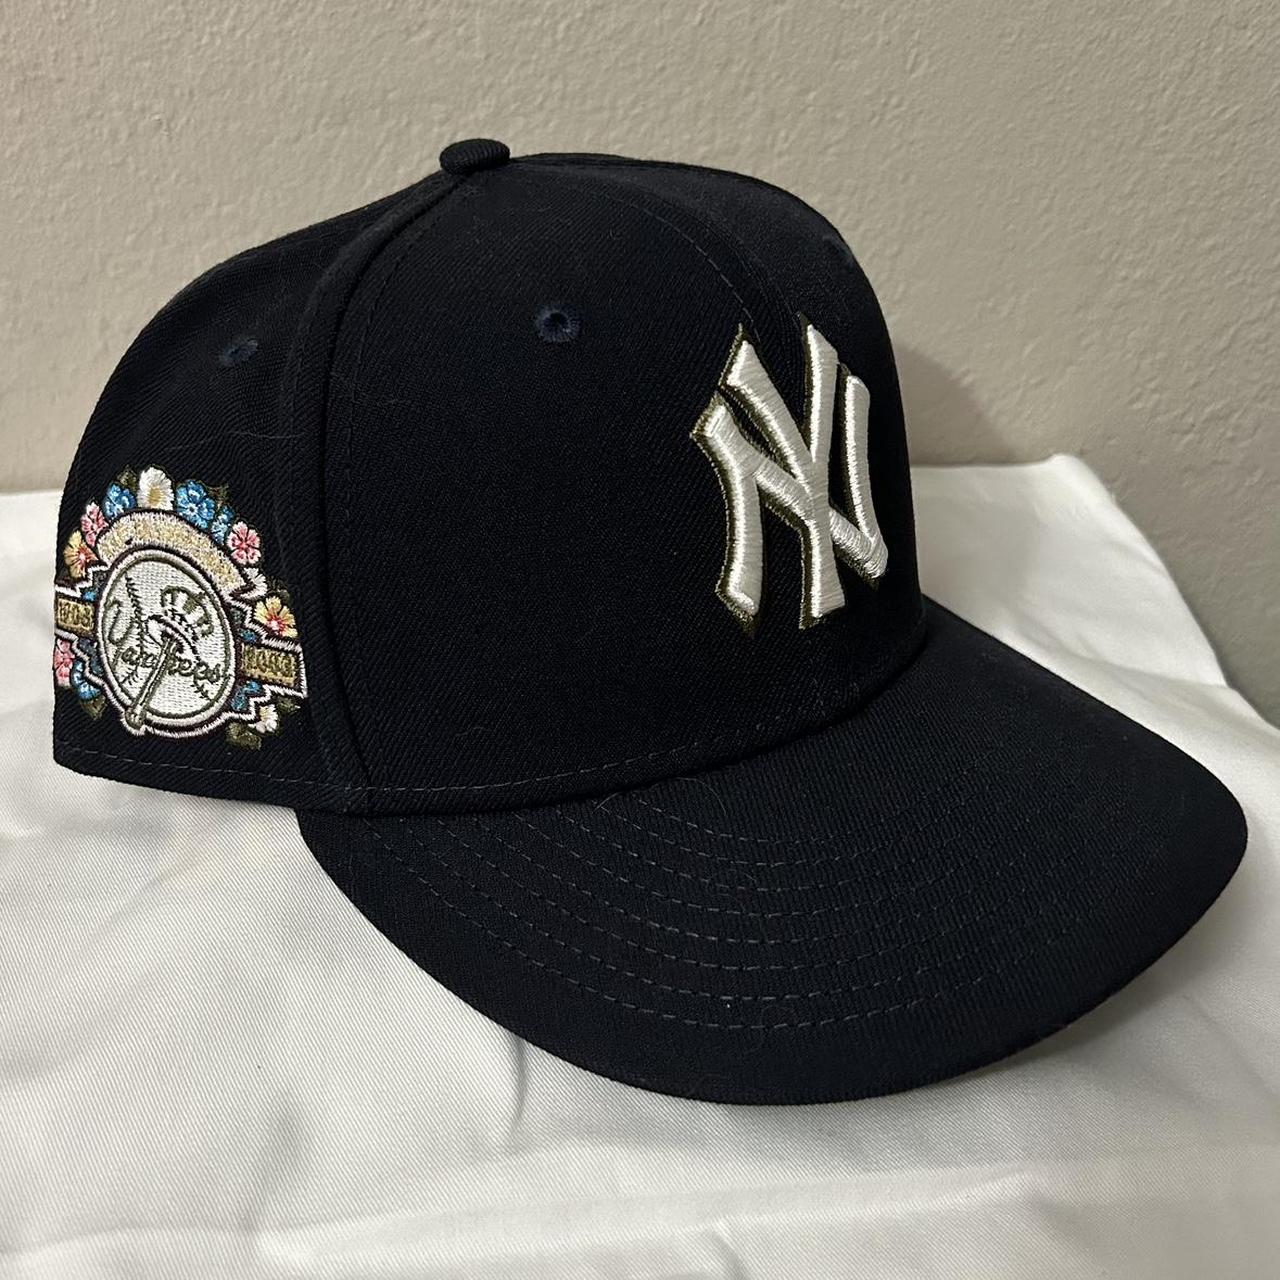 New York Yankees Botanical Garden Patch Fitted Hat 7... - Depop